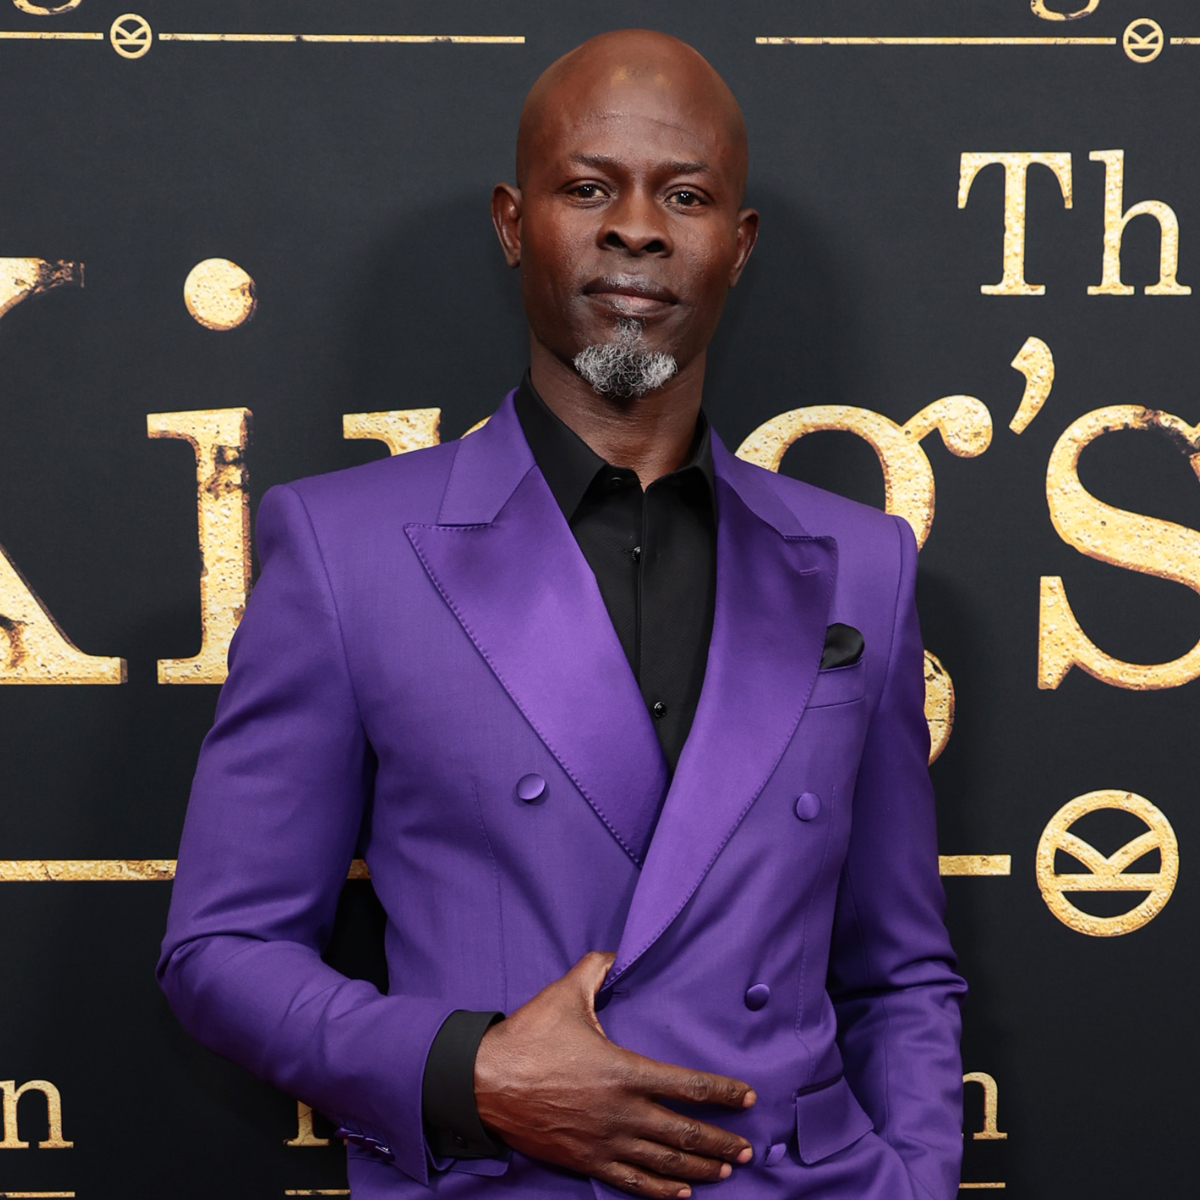 EXCLUSIVE: The King's Man star Djimon Hounsou discusses the film's 'rewarding' action sequence with Rhys Ifans